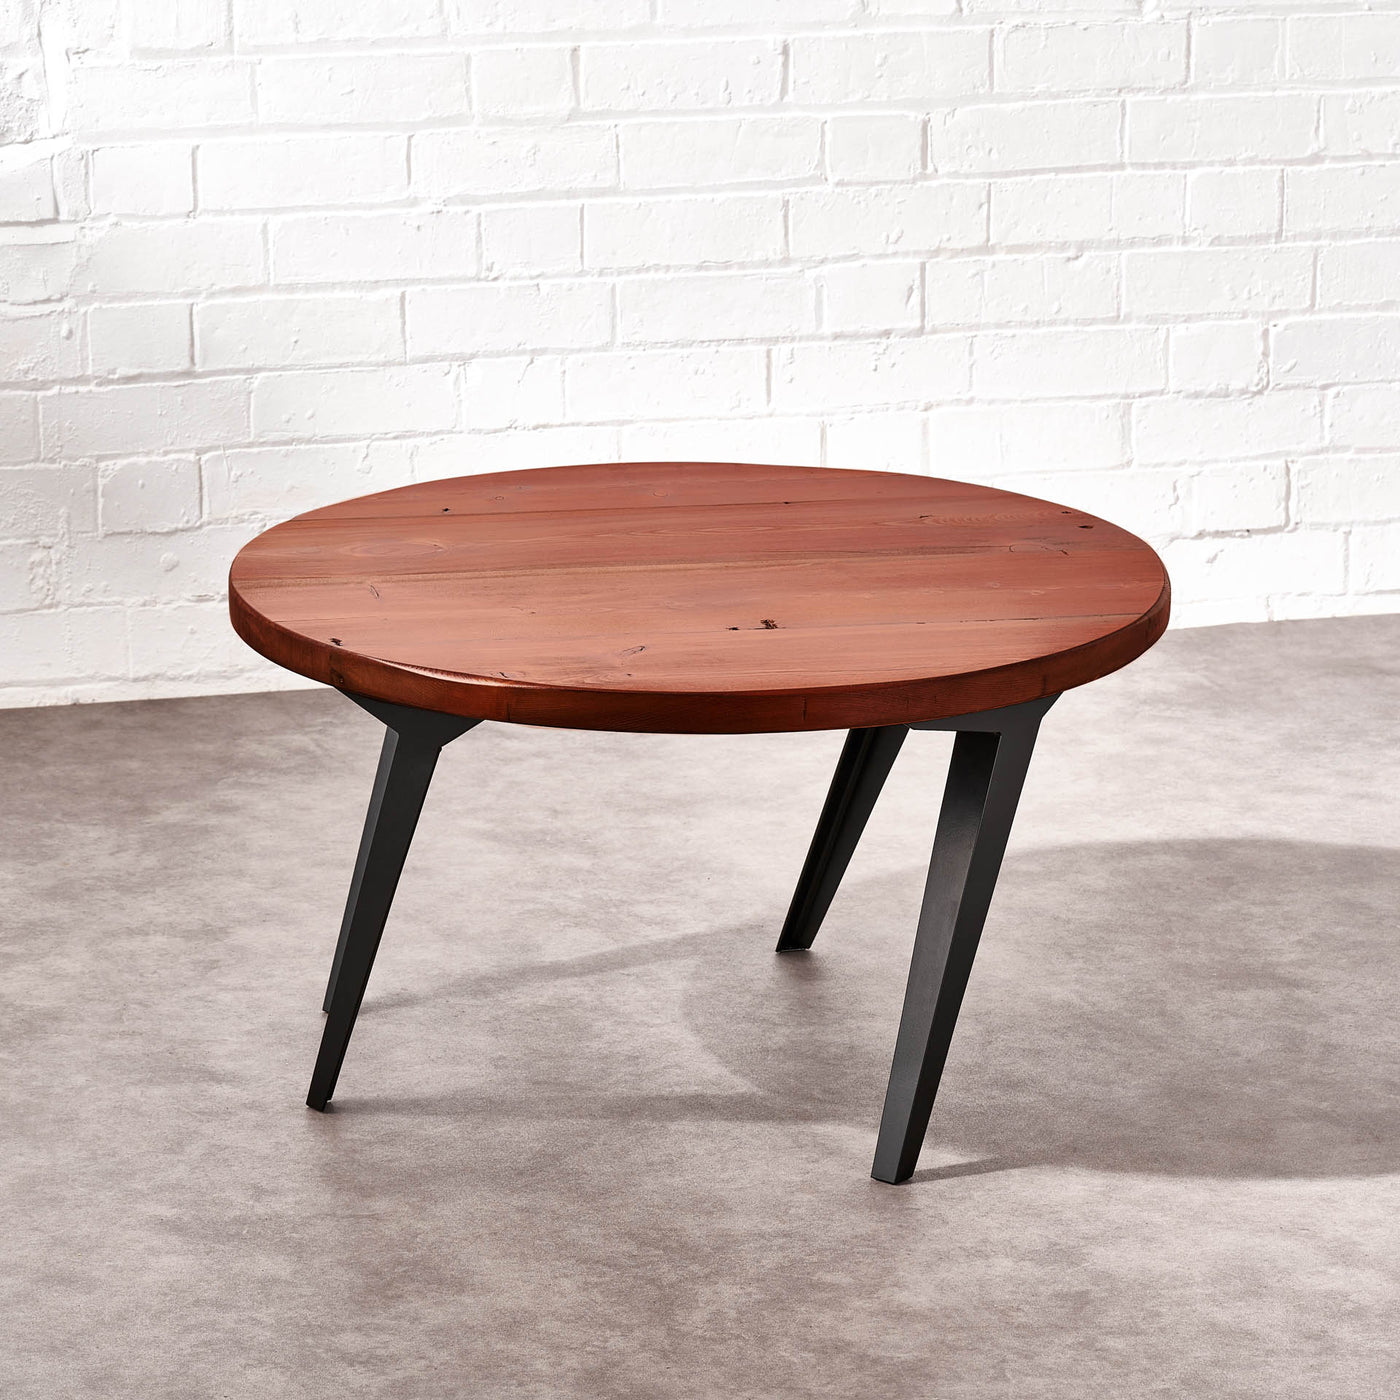 Quirky Handcrafted Round Reclaimed Wood Coffee or Side Table with Angled Metal Legs